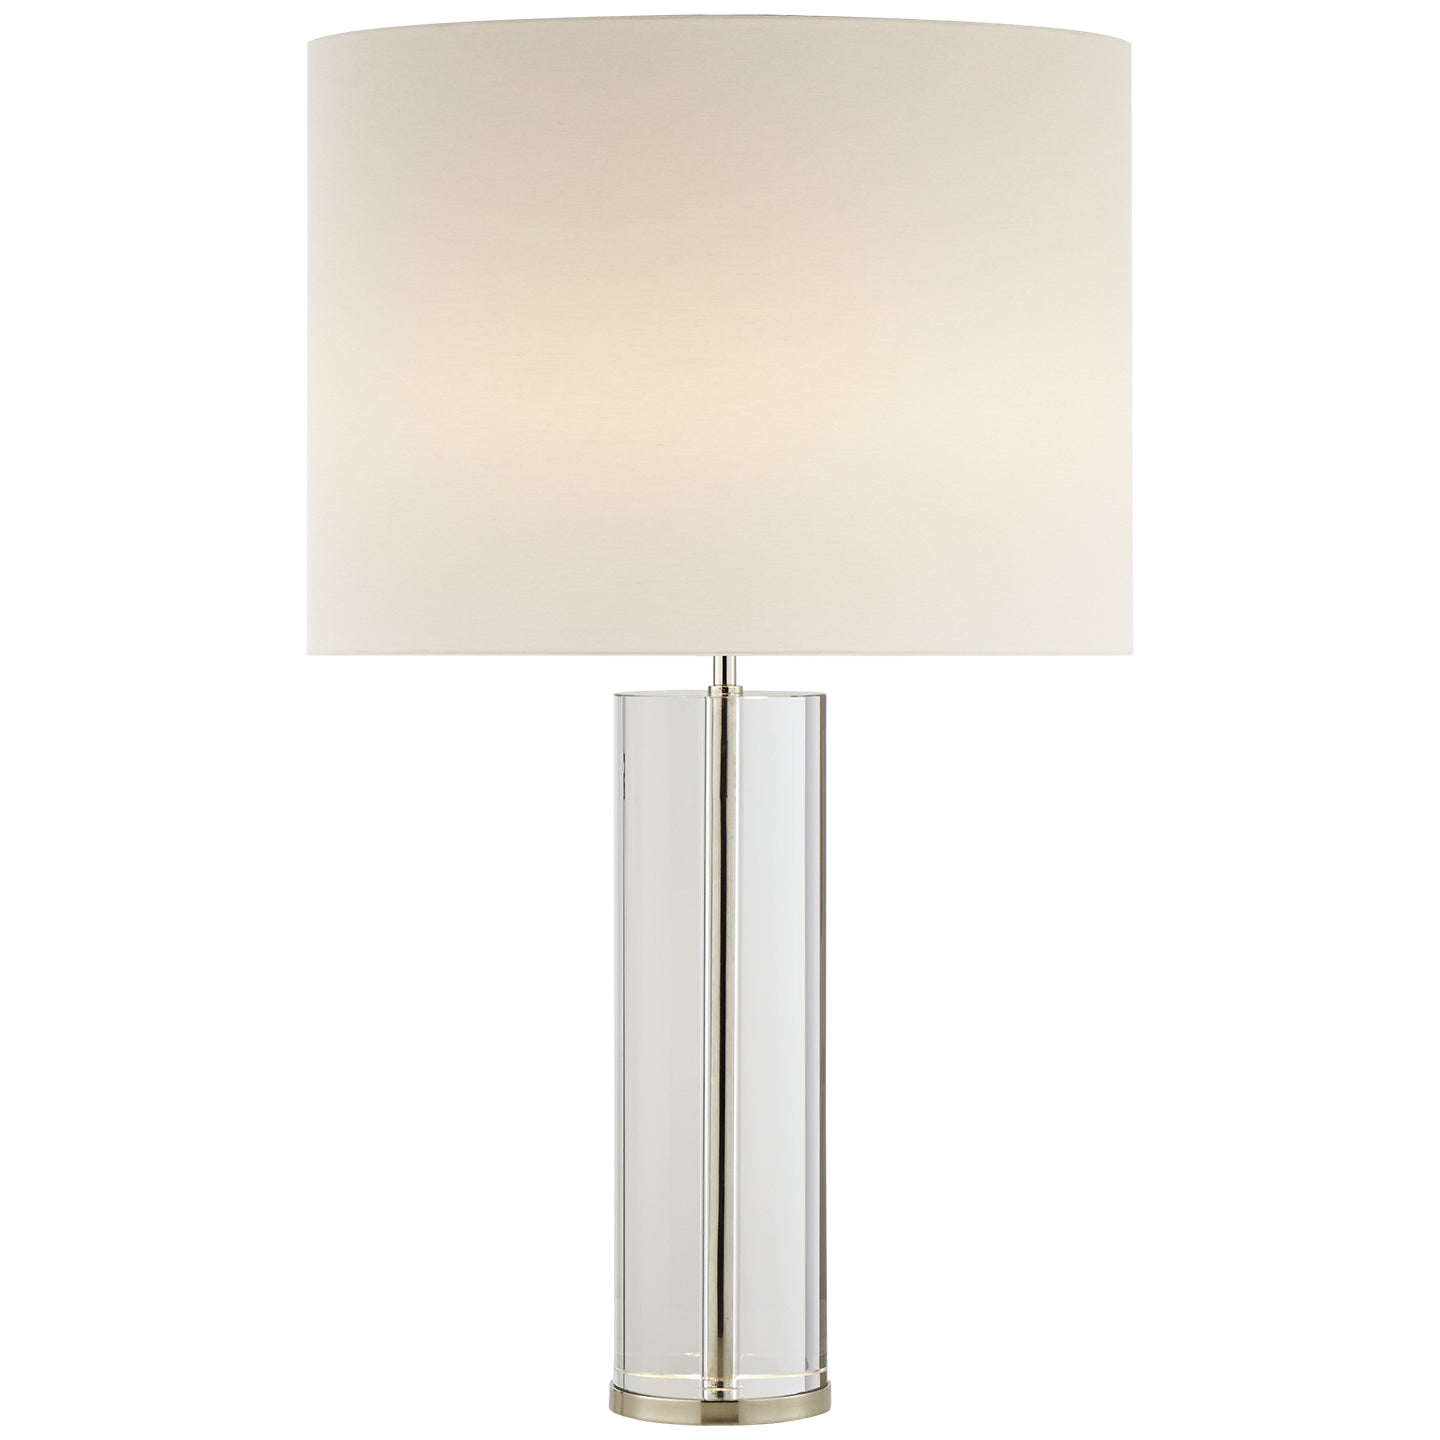 Load image into Gallery viewer, Visual Comfort Signature - ARN 3024CG/PN-L - Two Light Table Lamp - Lineham - Crystal with Polished Nickel
